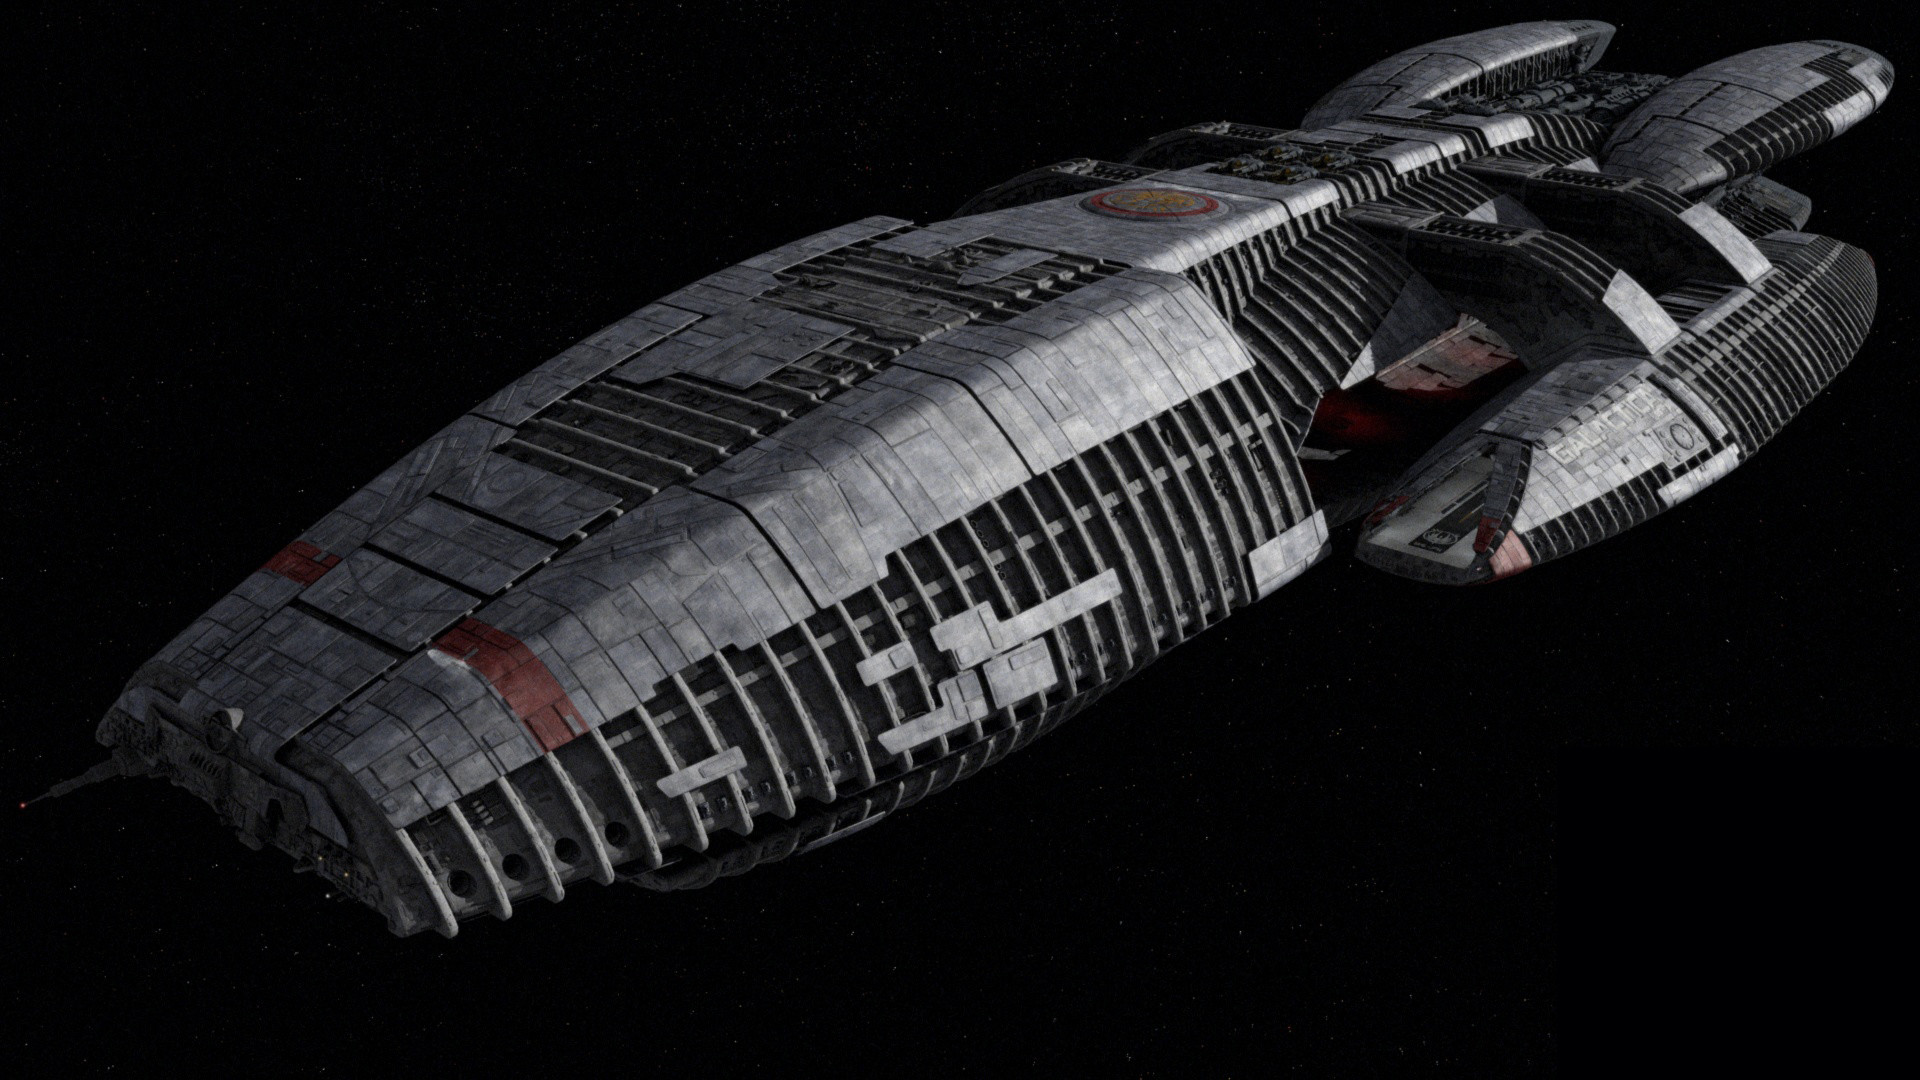 1920x1080 Syfy - Watch Full Episodes | Chinese news site posts Battlestar Galactica  as real aircraft carrier design